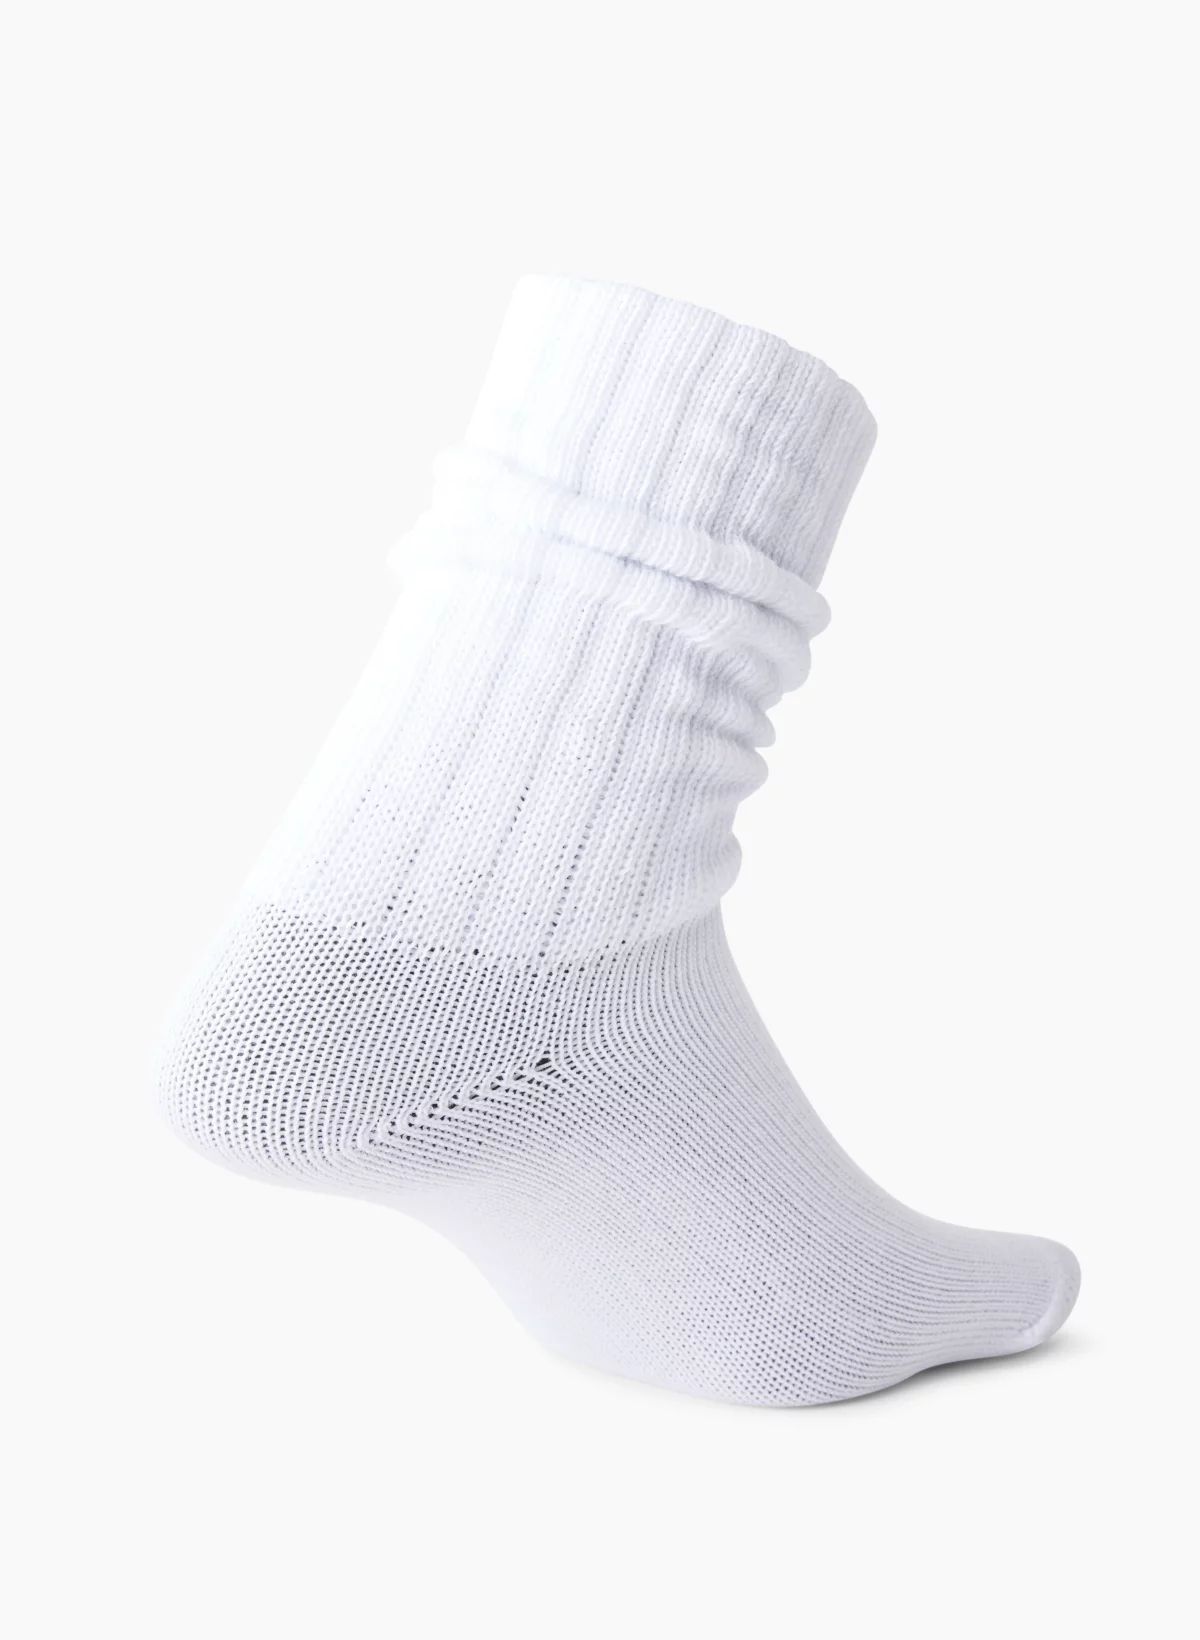 BEST-EVER SLOUCHY ANKLE SOCK | Aritzia